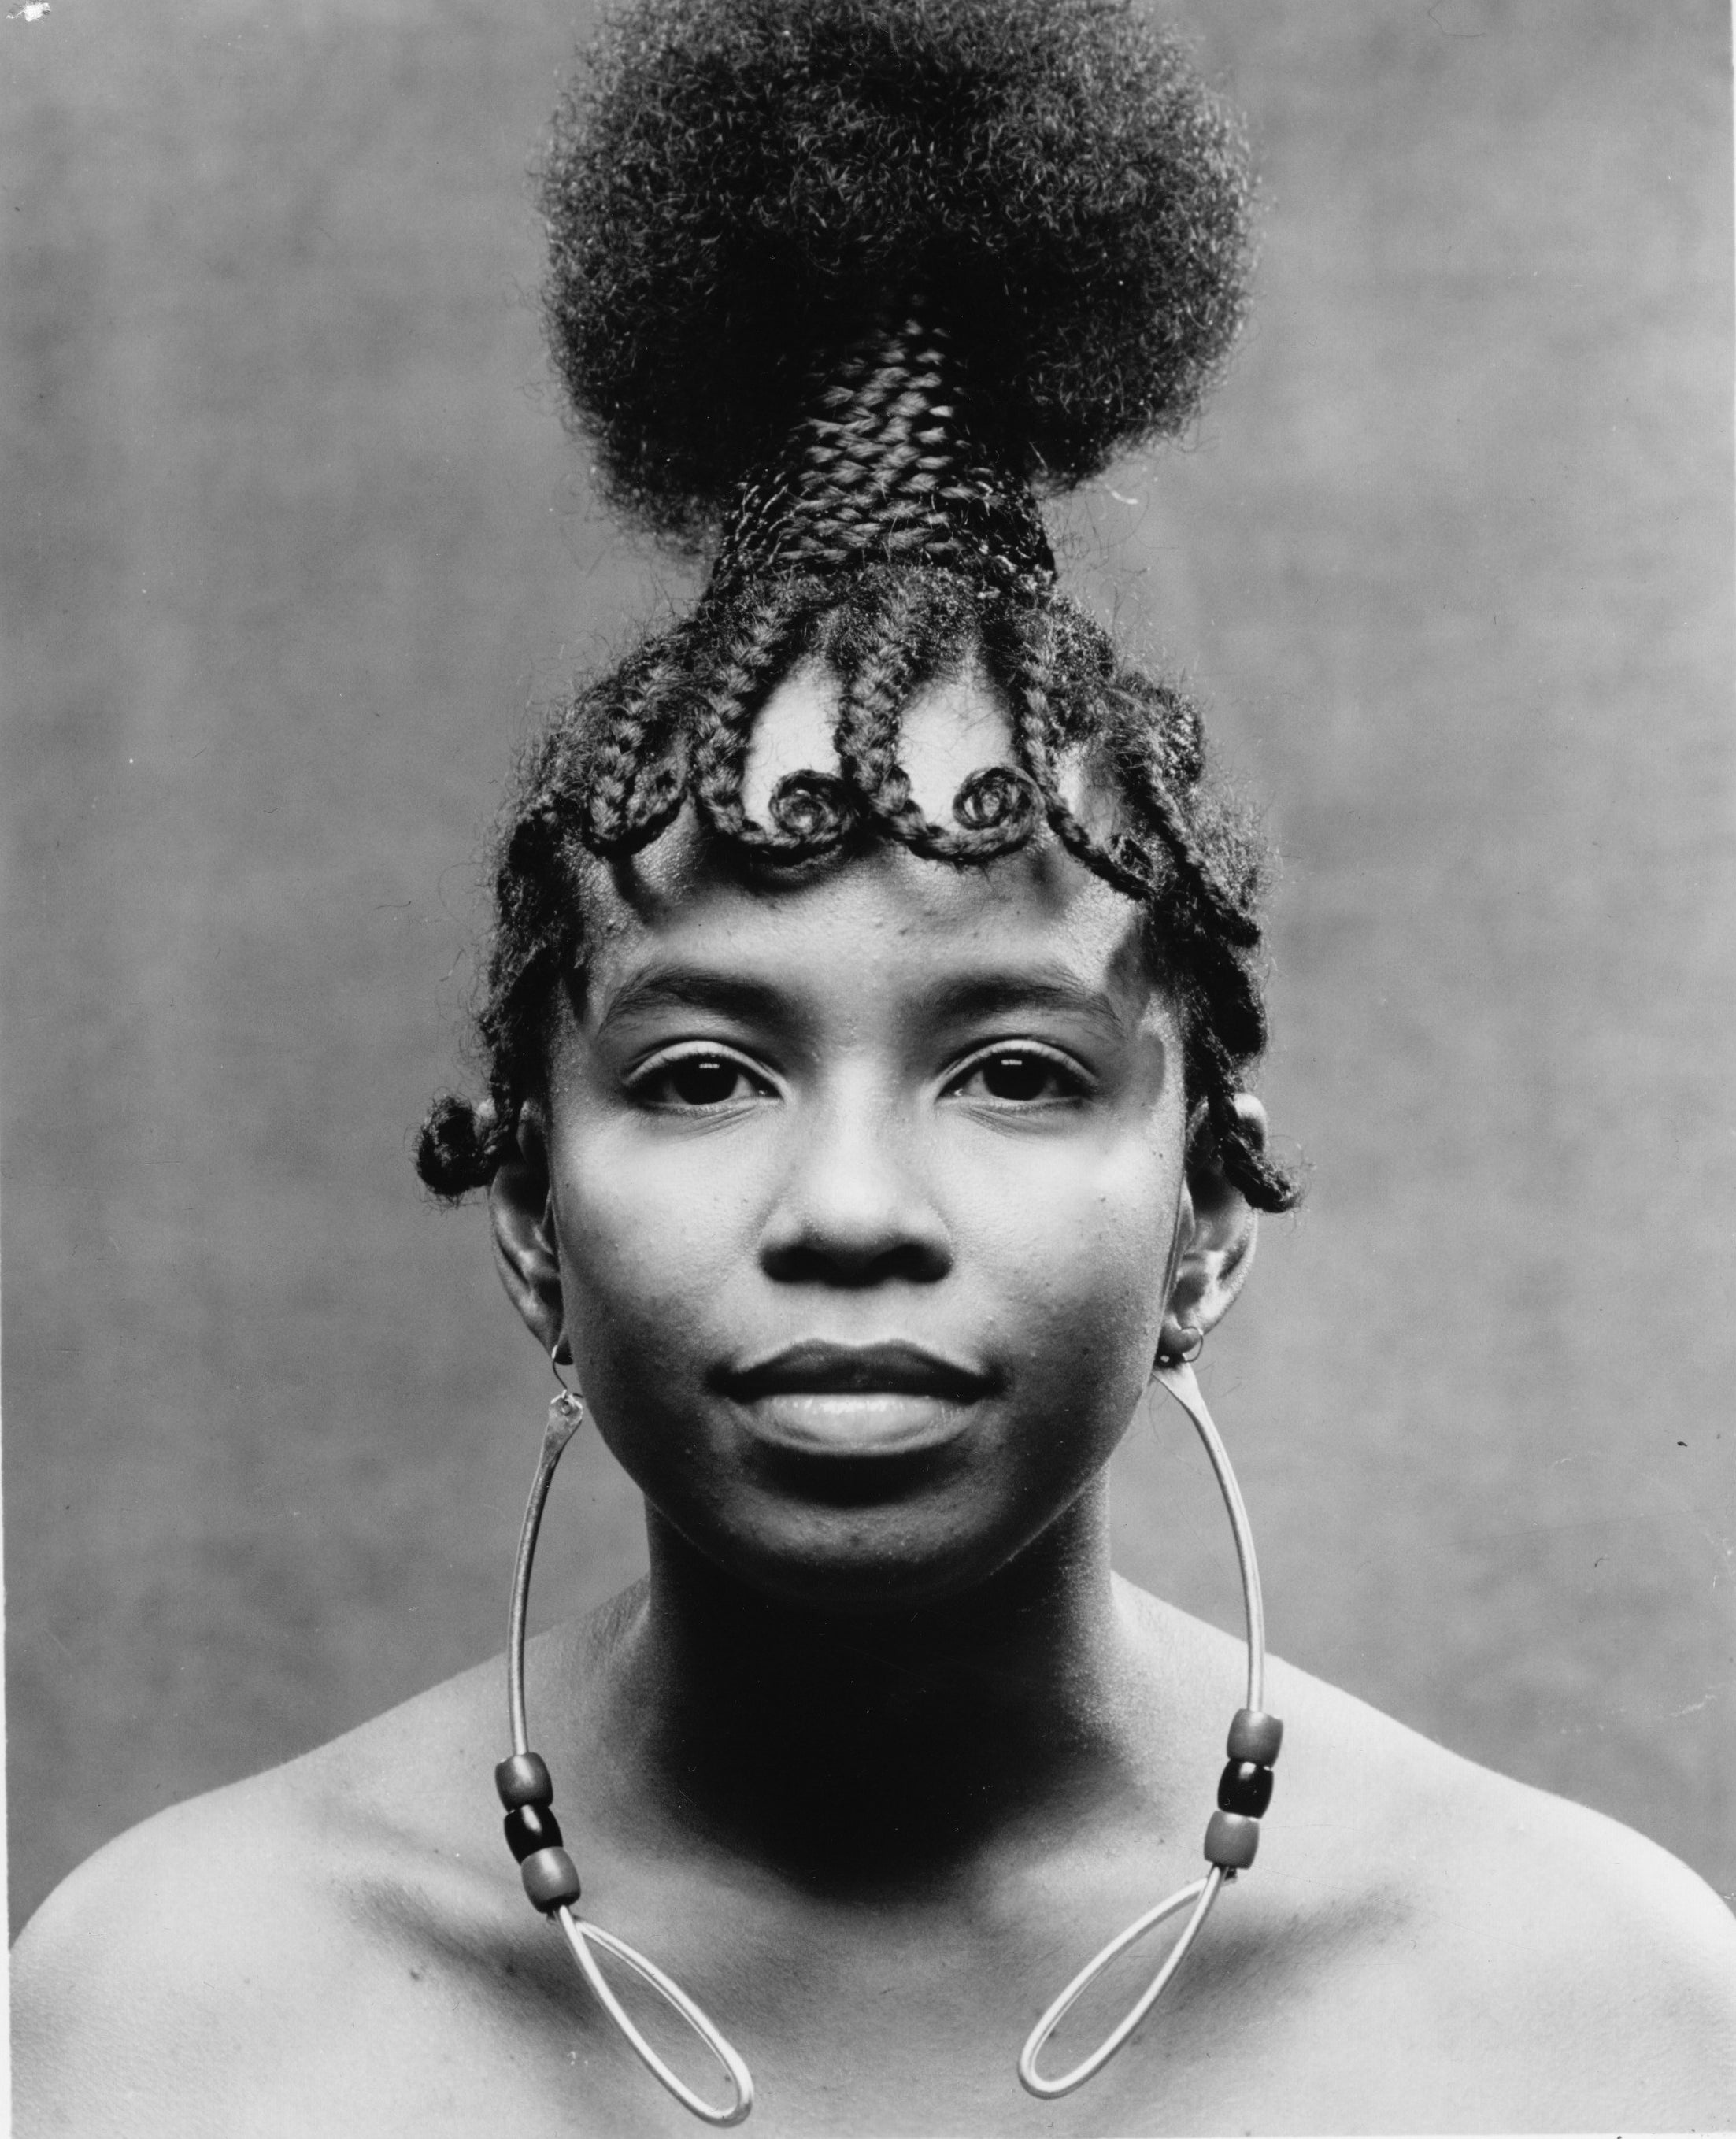 A woman with long earrings, braids, and her hair done up, with her shoulders bare